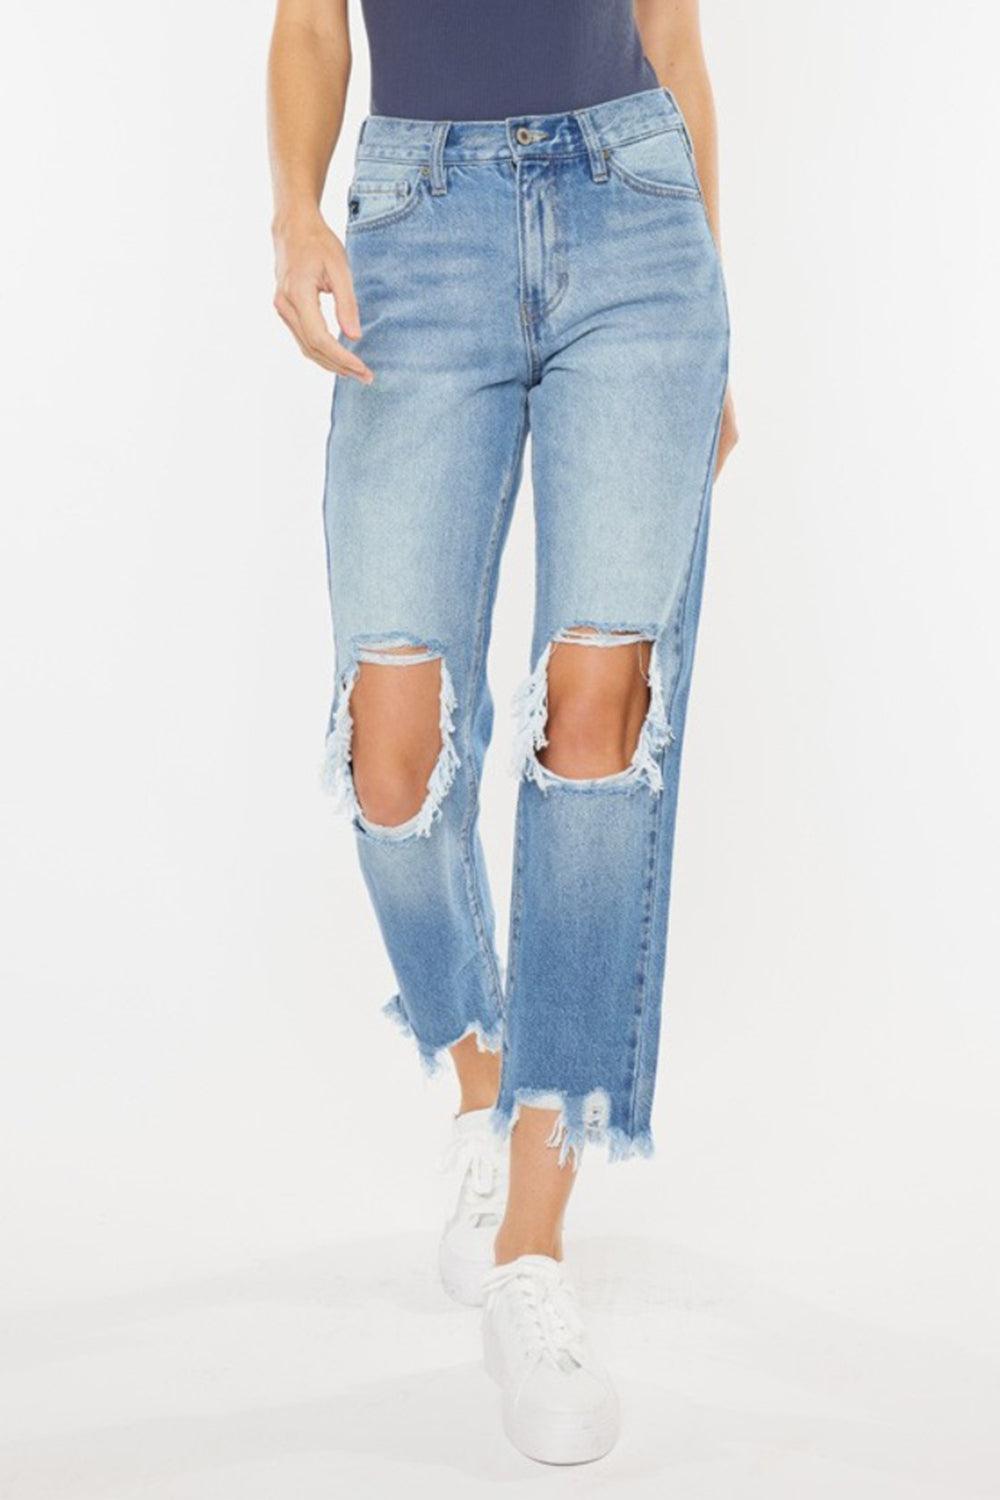 a woman wearing ripped jeans and a tank top